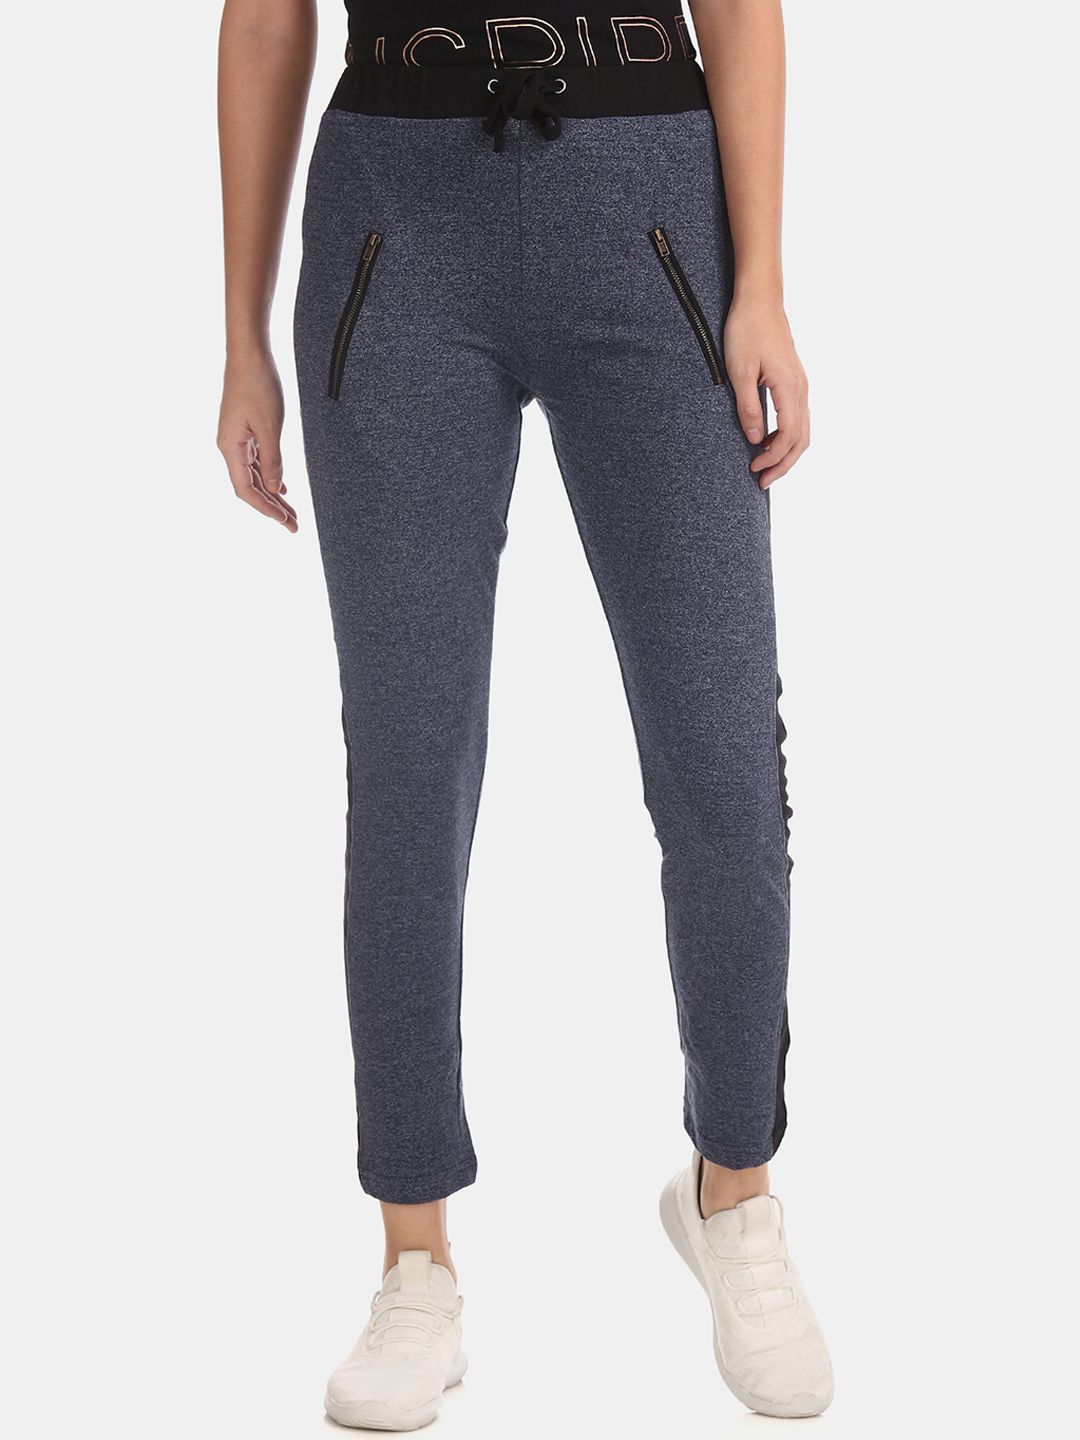 Sugr Women Grey & Black Solid Heathered Active Track Pants Price in India